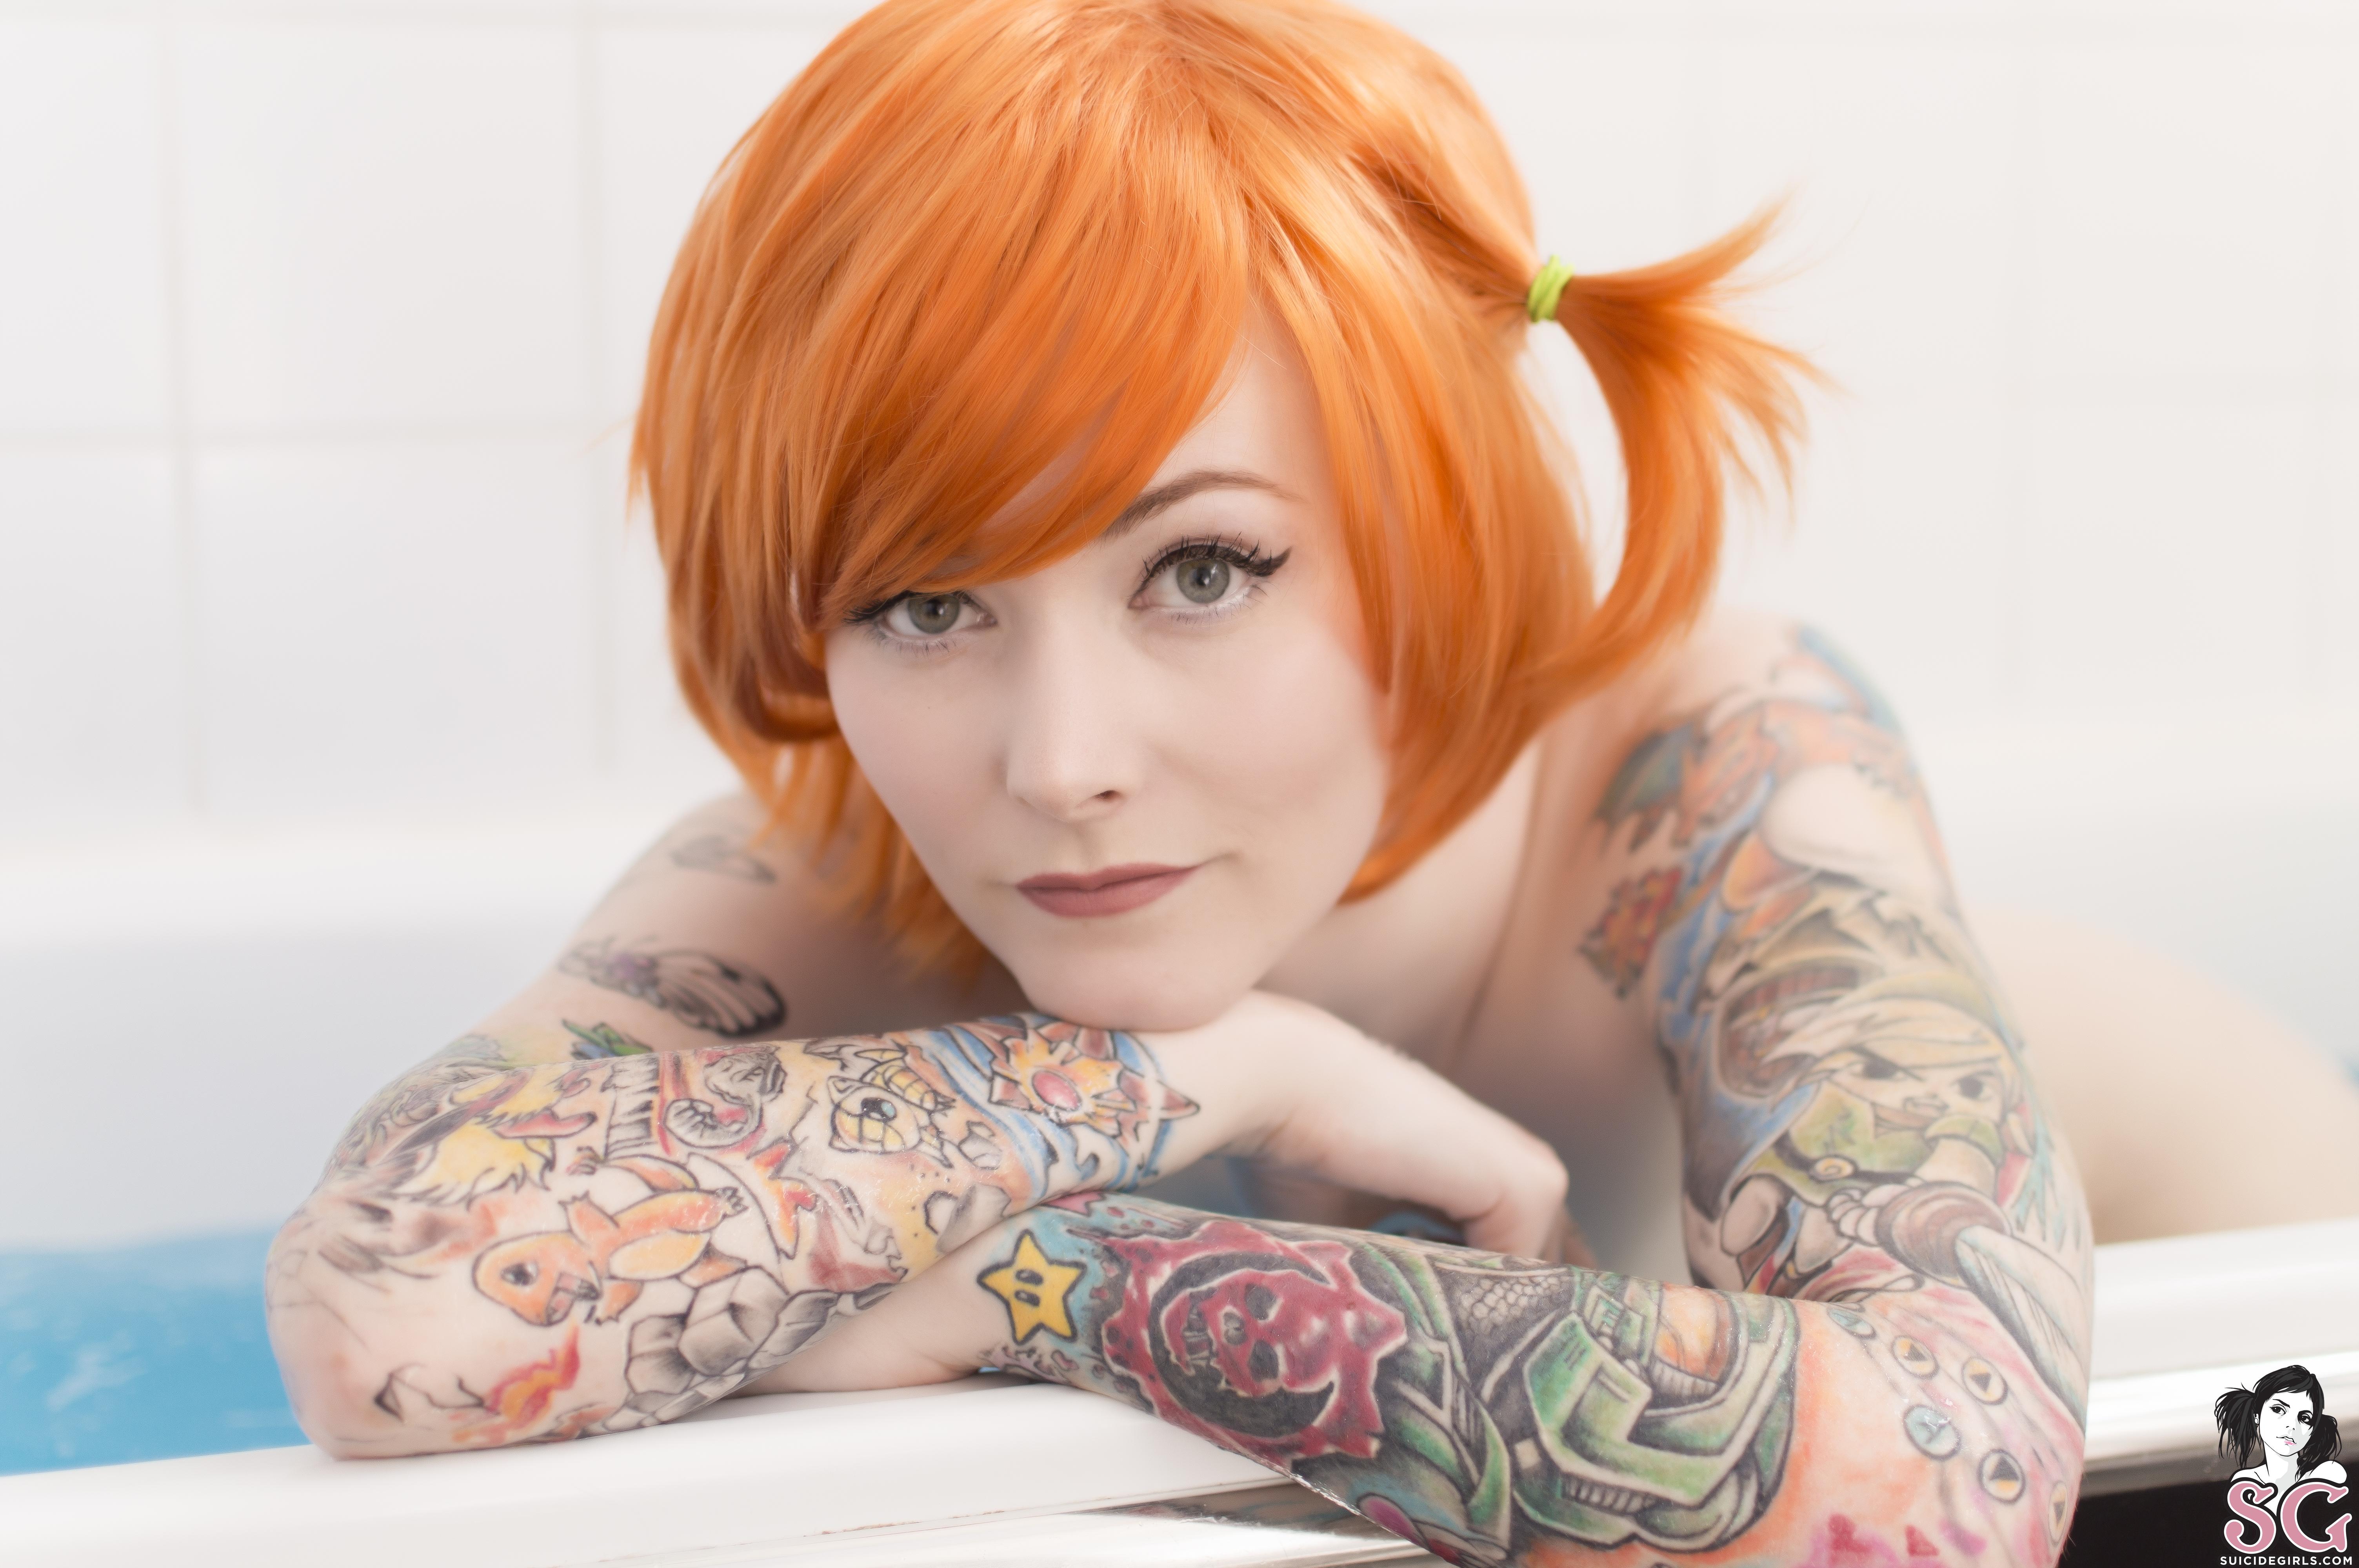 Beautiful Suicide Girl Mistyy Water Type 30 Mesmerizing High resolution iPh...